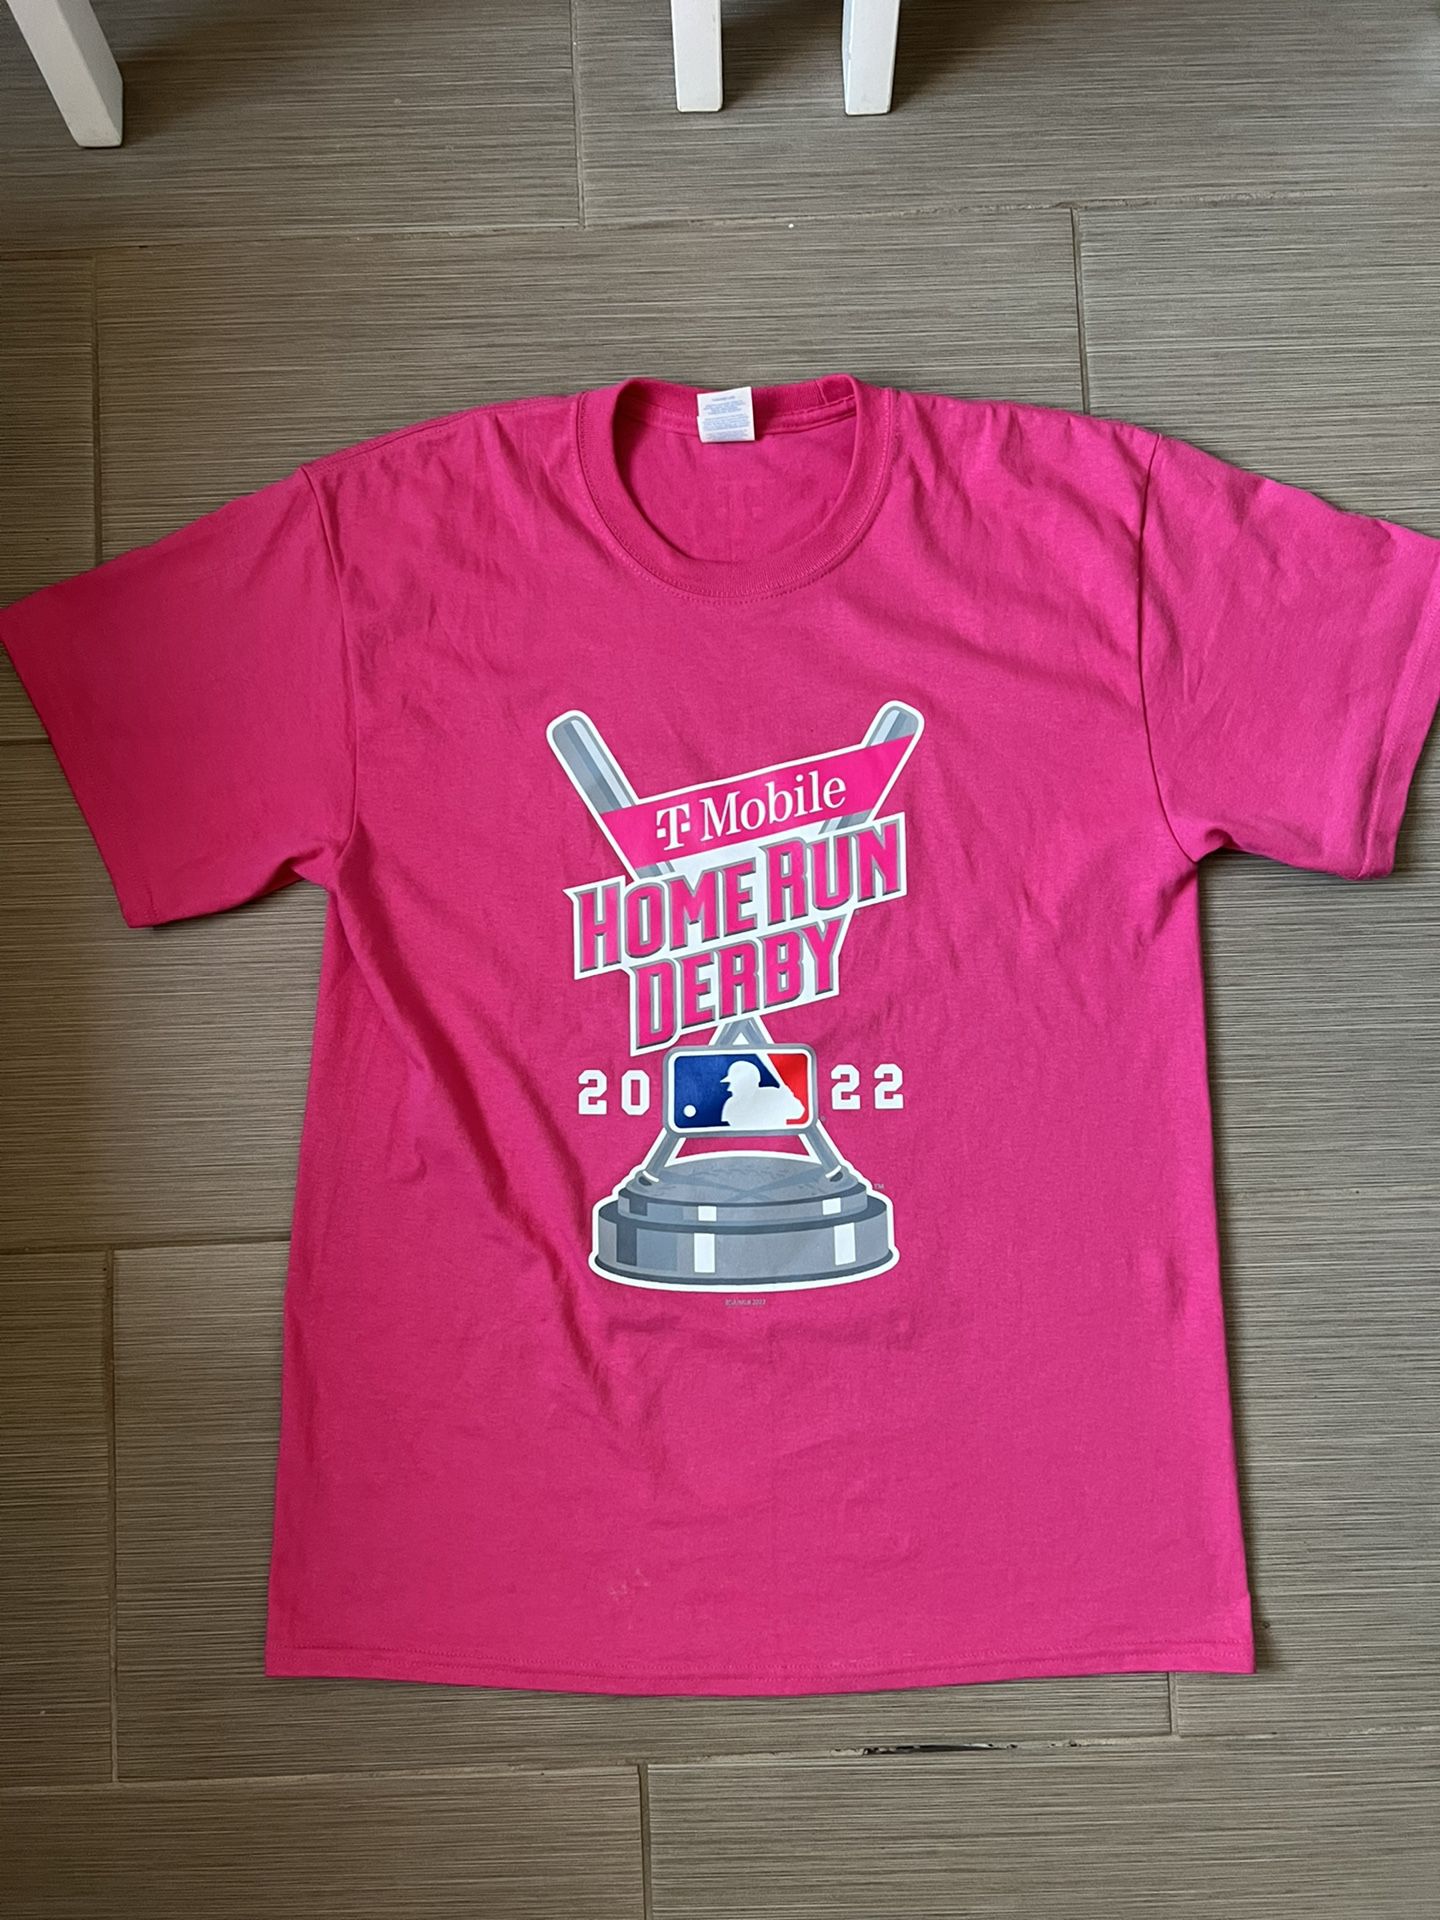 Home Run Derby 2022 MLB All-Stars T-shirt Size Large for Sale in Los  Angeles, CA - OfferUp